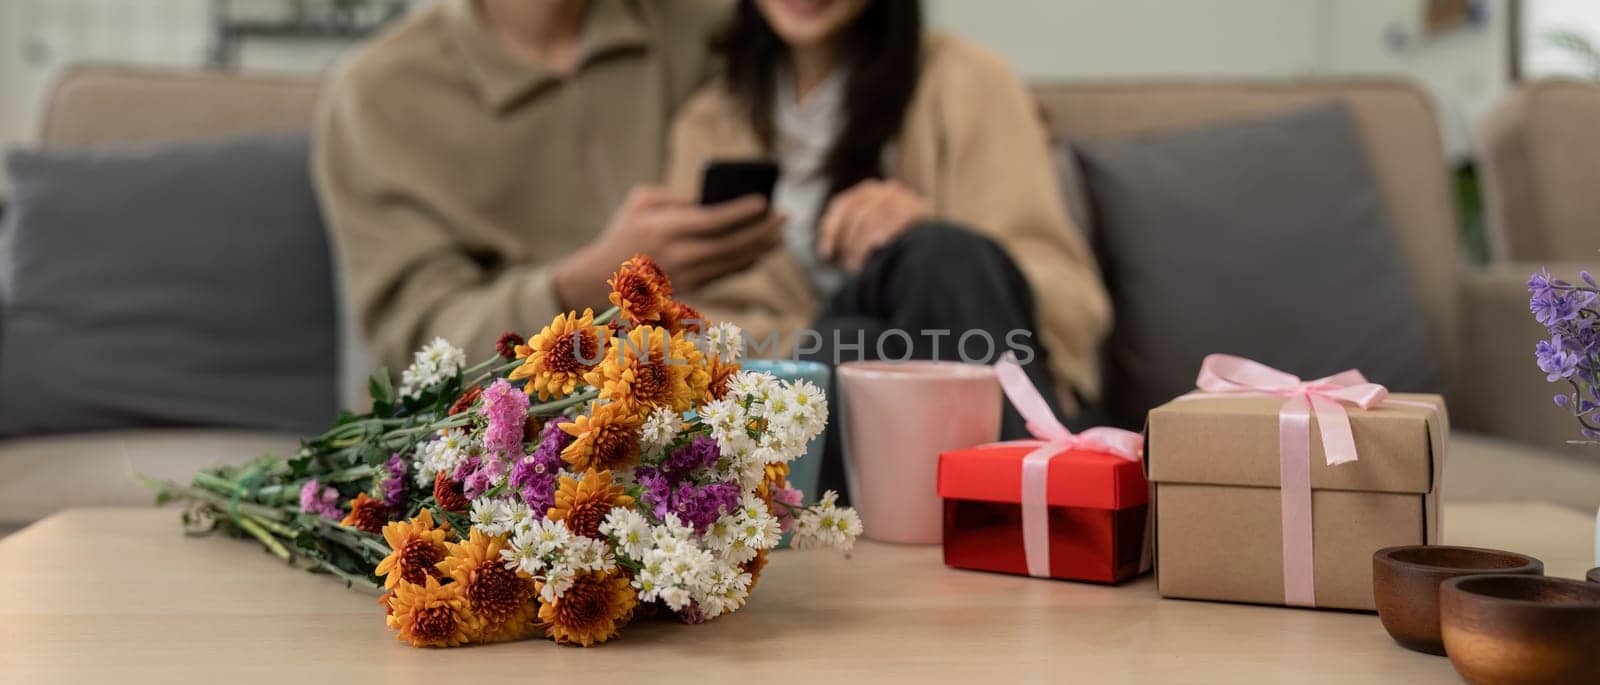 Romantic young asian couple embracing with holding flowers and smiling in living room at home. fall in love. Valentine concept by nateemee